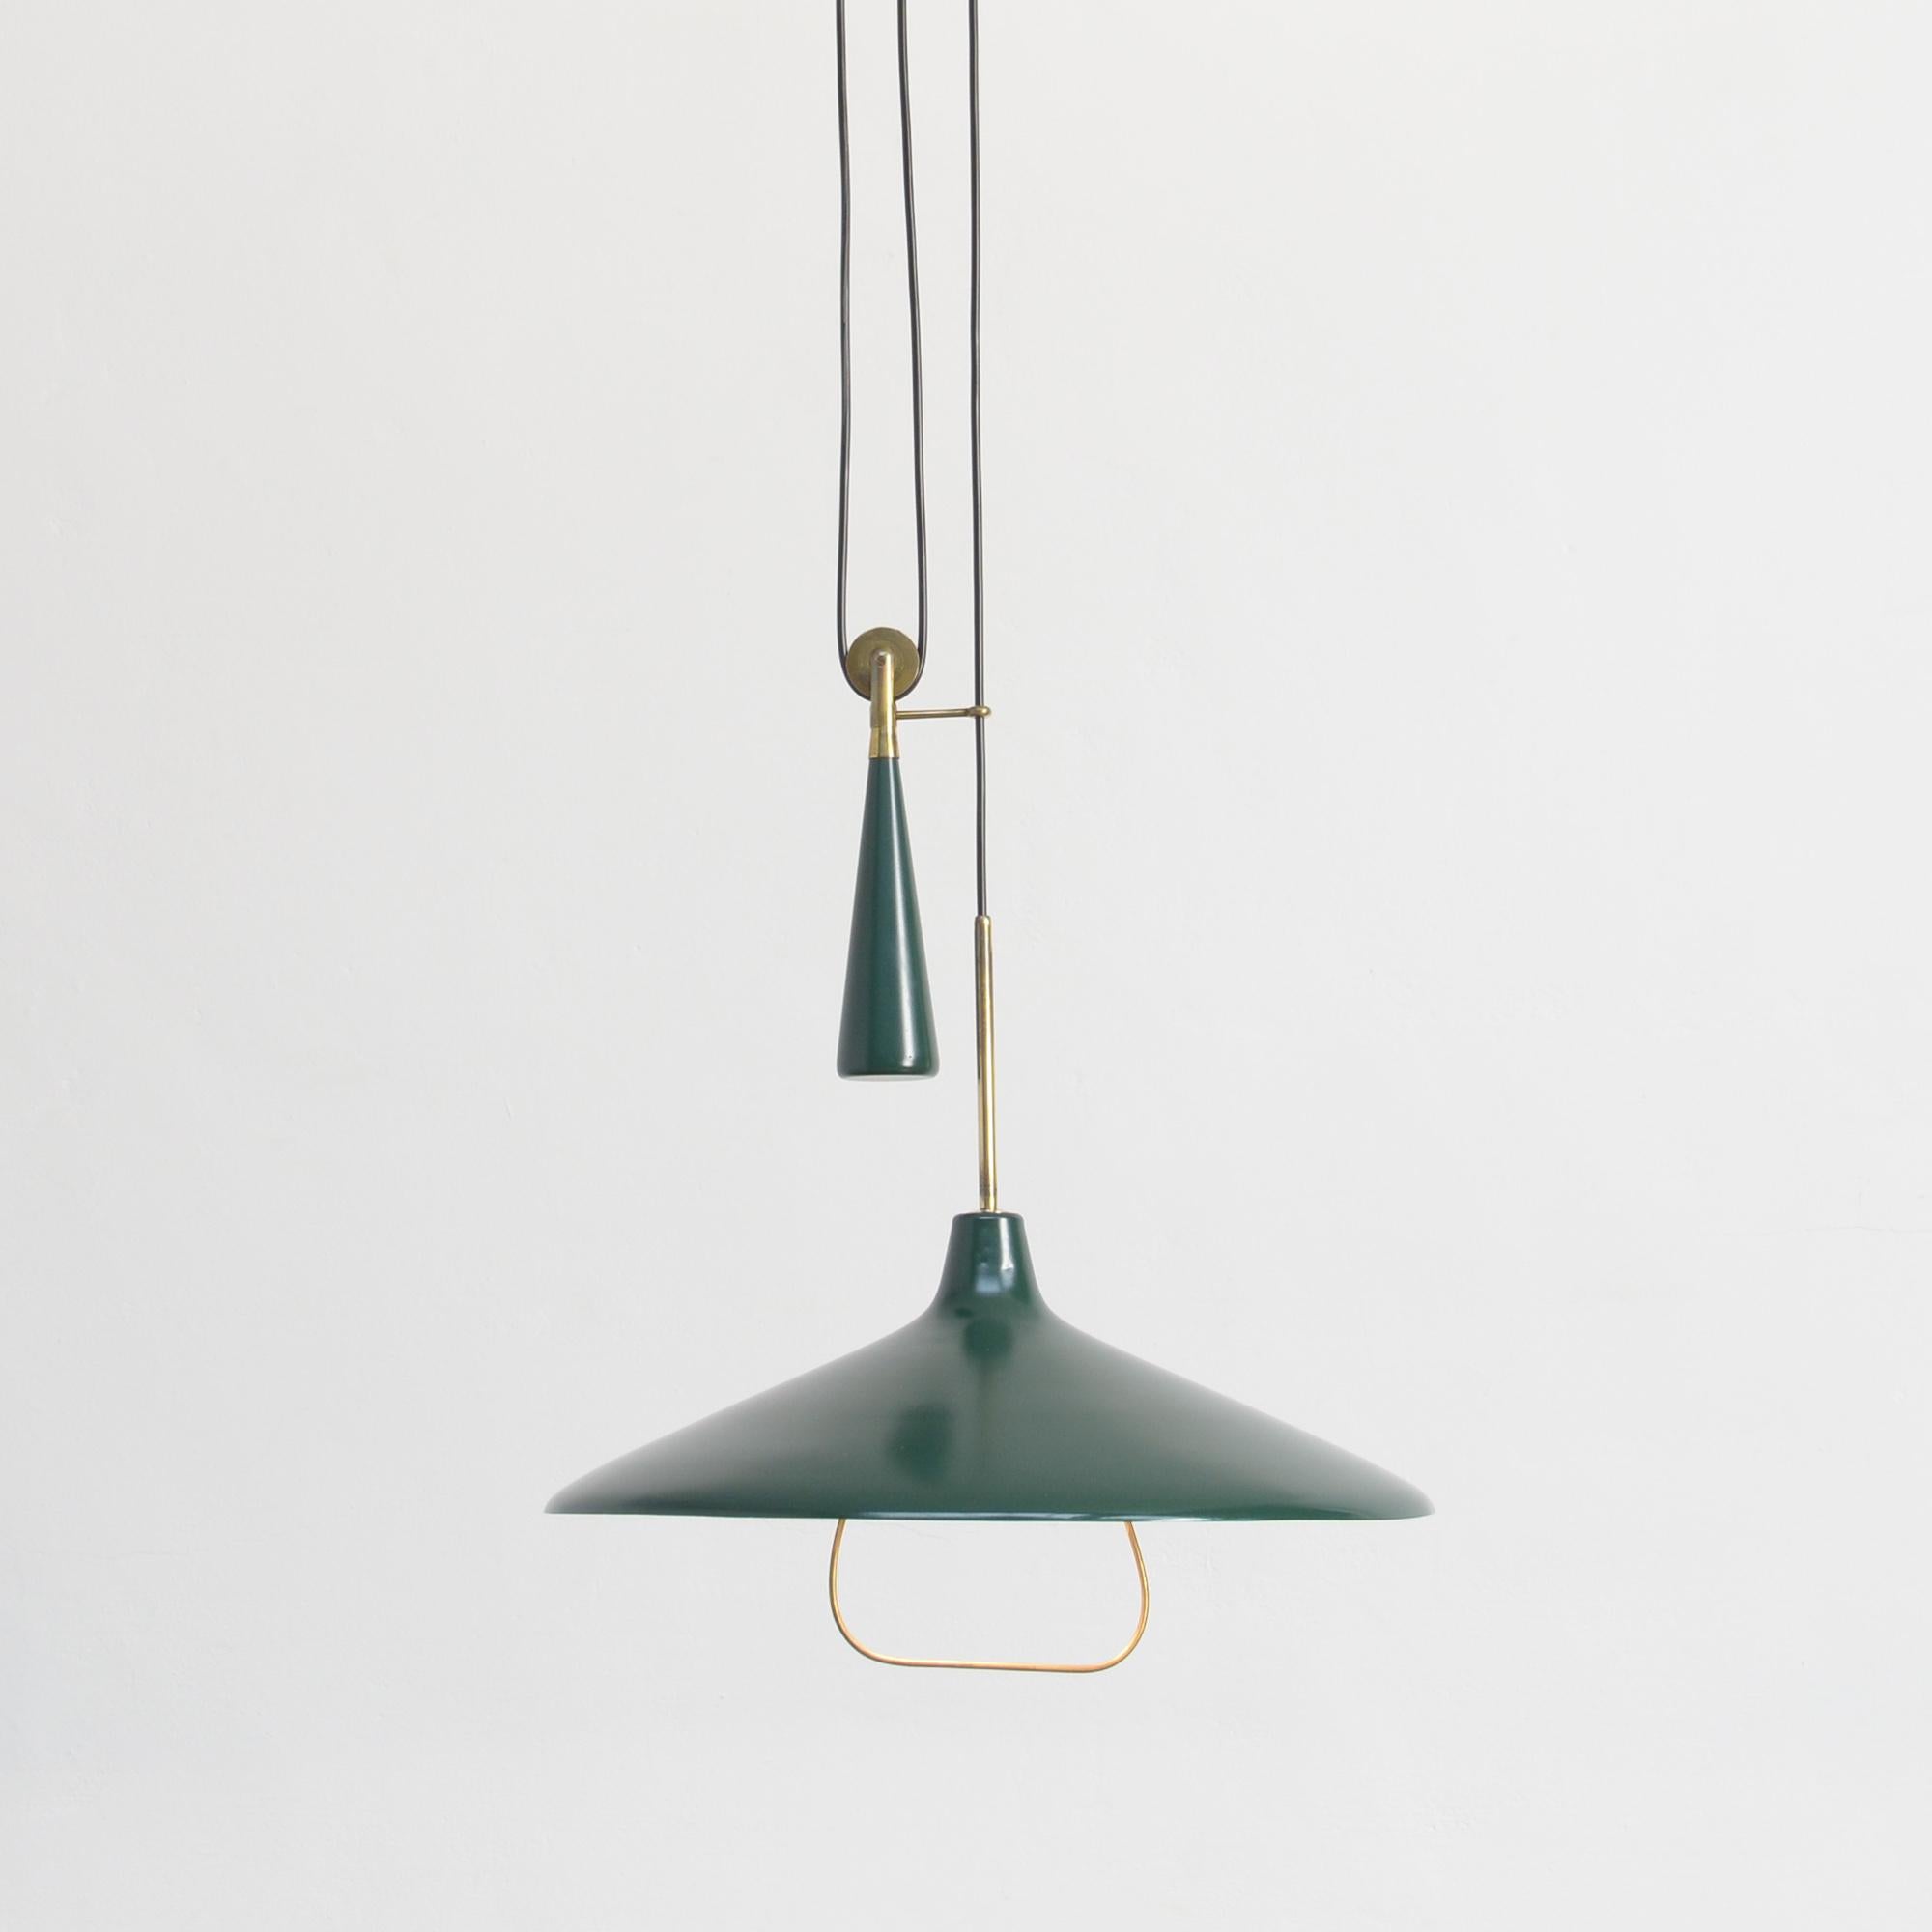 This elegant ceiling pendant was designed by Angelo Lelii for Arredoluce in 1947.
The beautiful shaped diffuser in dark green lacquered aluminum is hanging on a sophisticated latch system with counterweight, that give you the possibility to hang